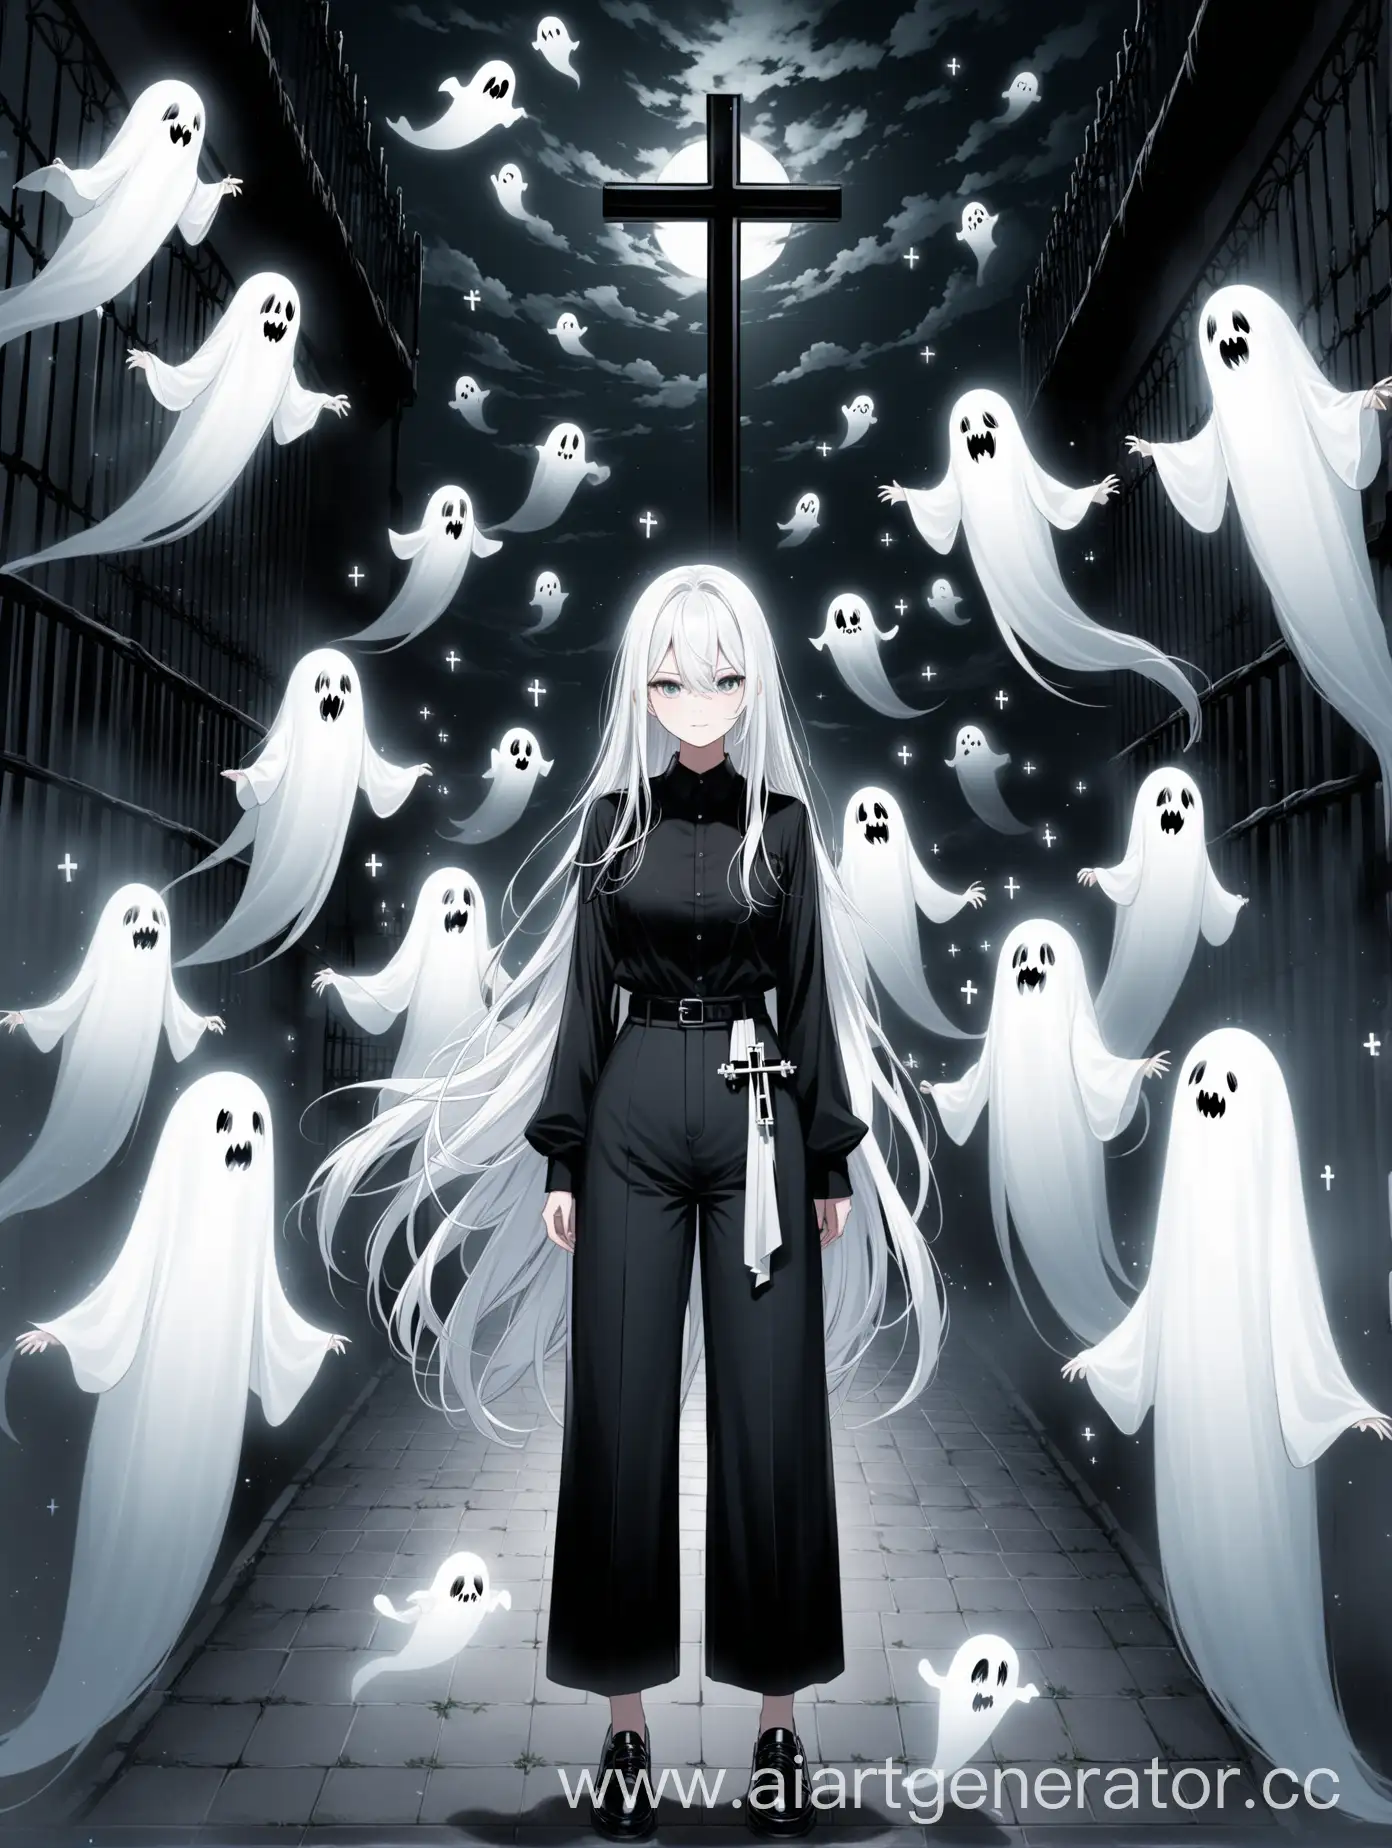 Ethereal-Girl-with-Long-White-Hair-and-Cross-Amidst-Ghostly-Figures